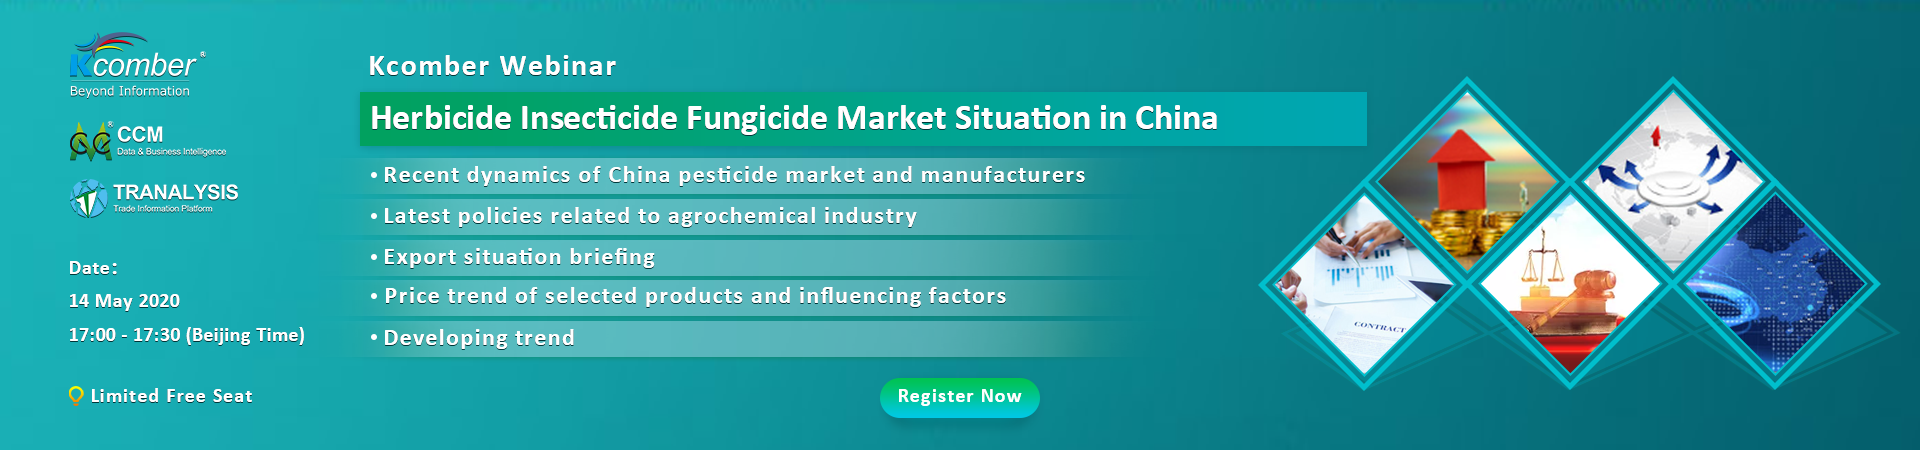 Herbicide, Insecticide,Fungicide Market Situation in China